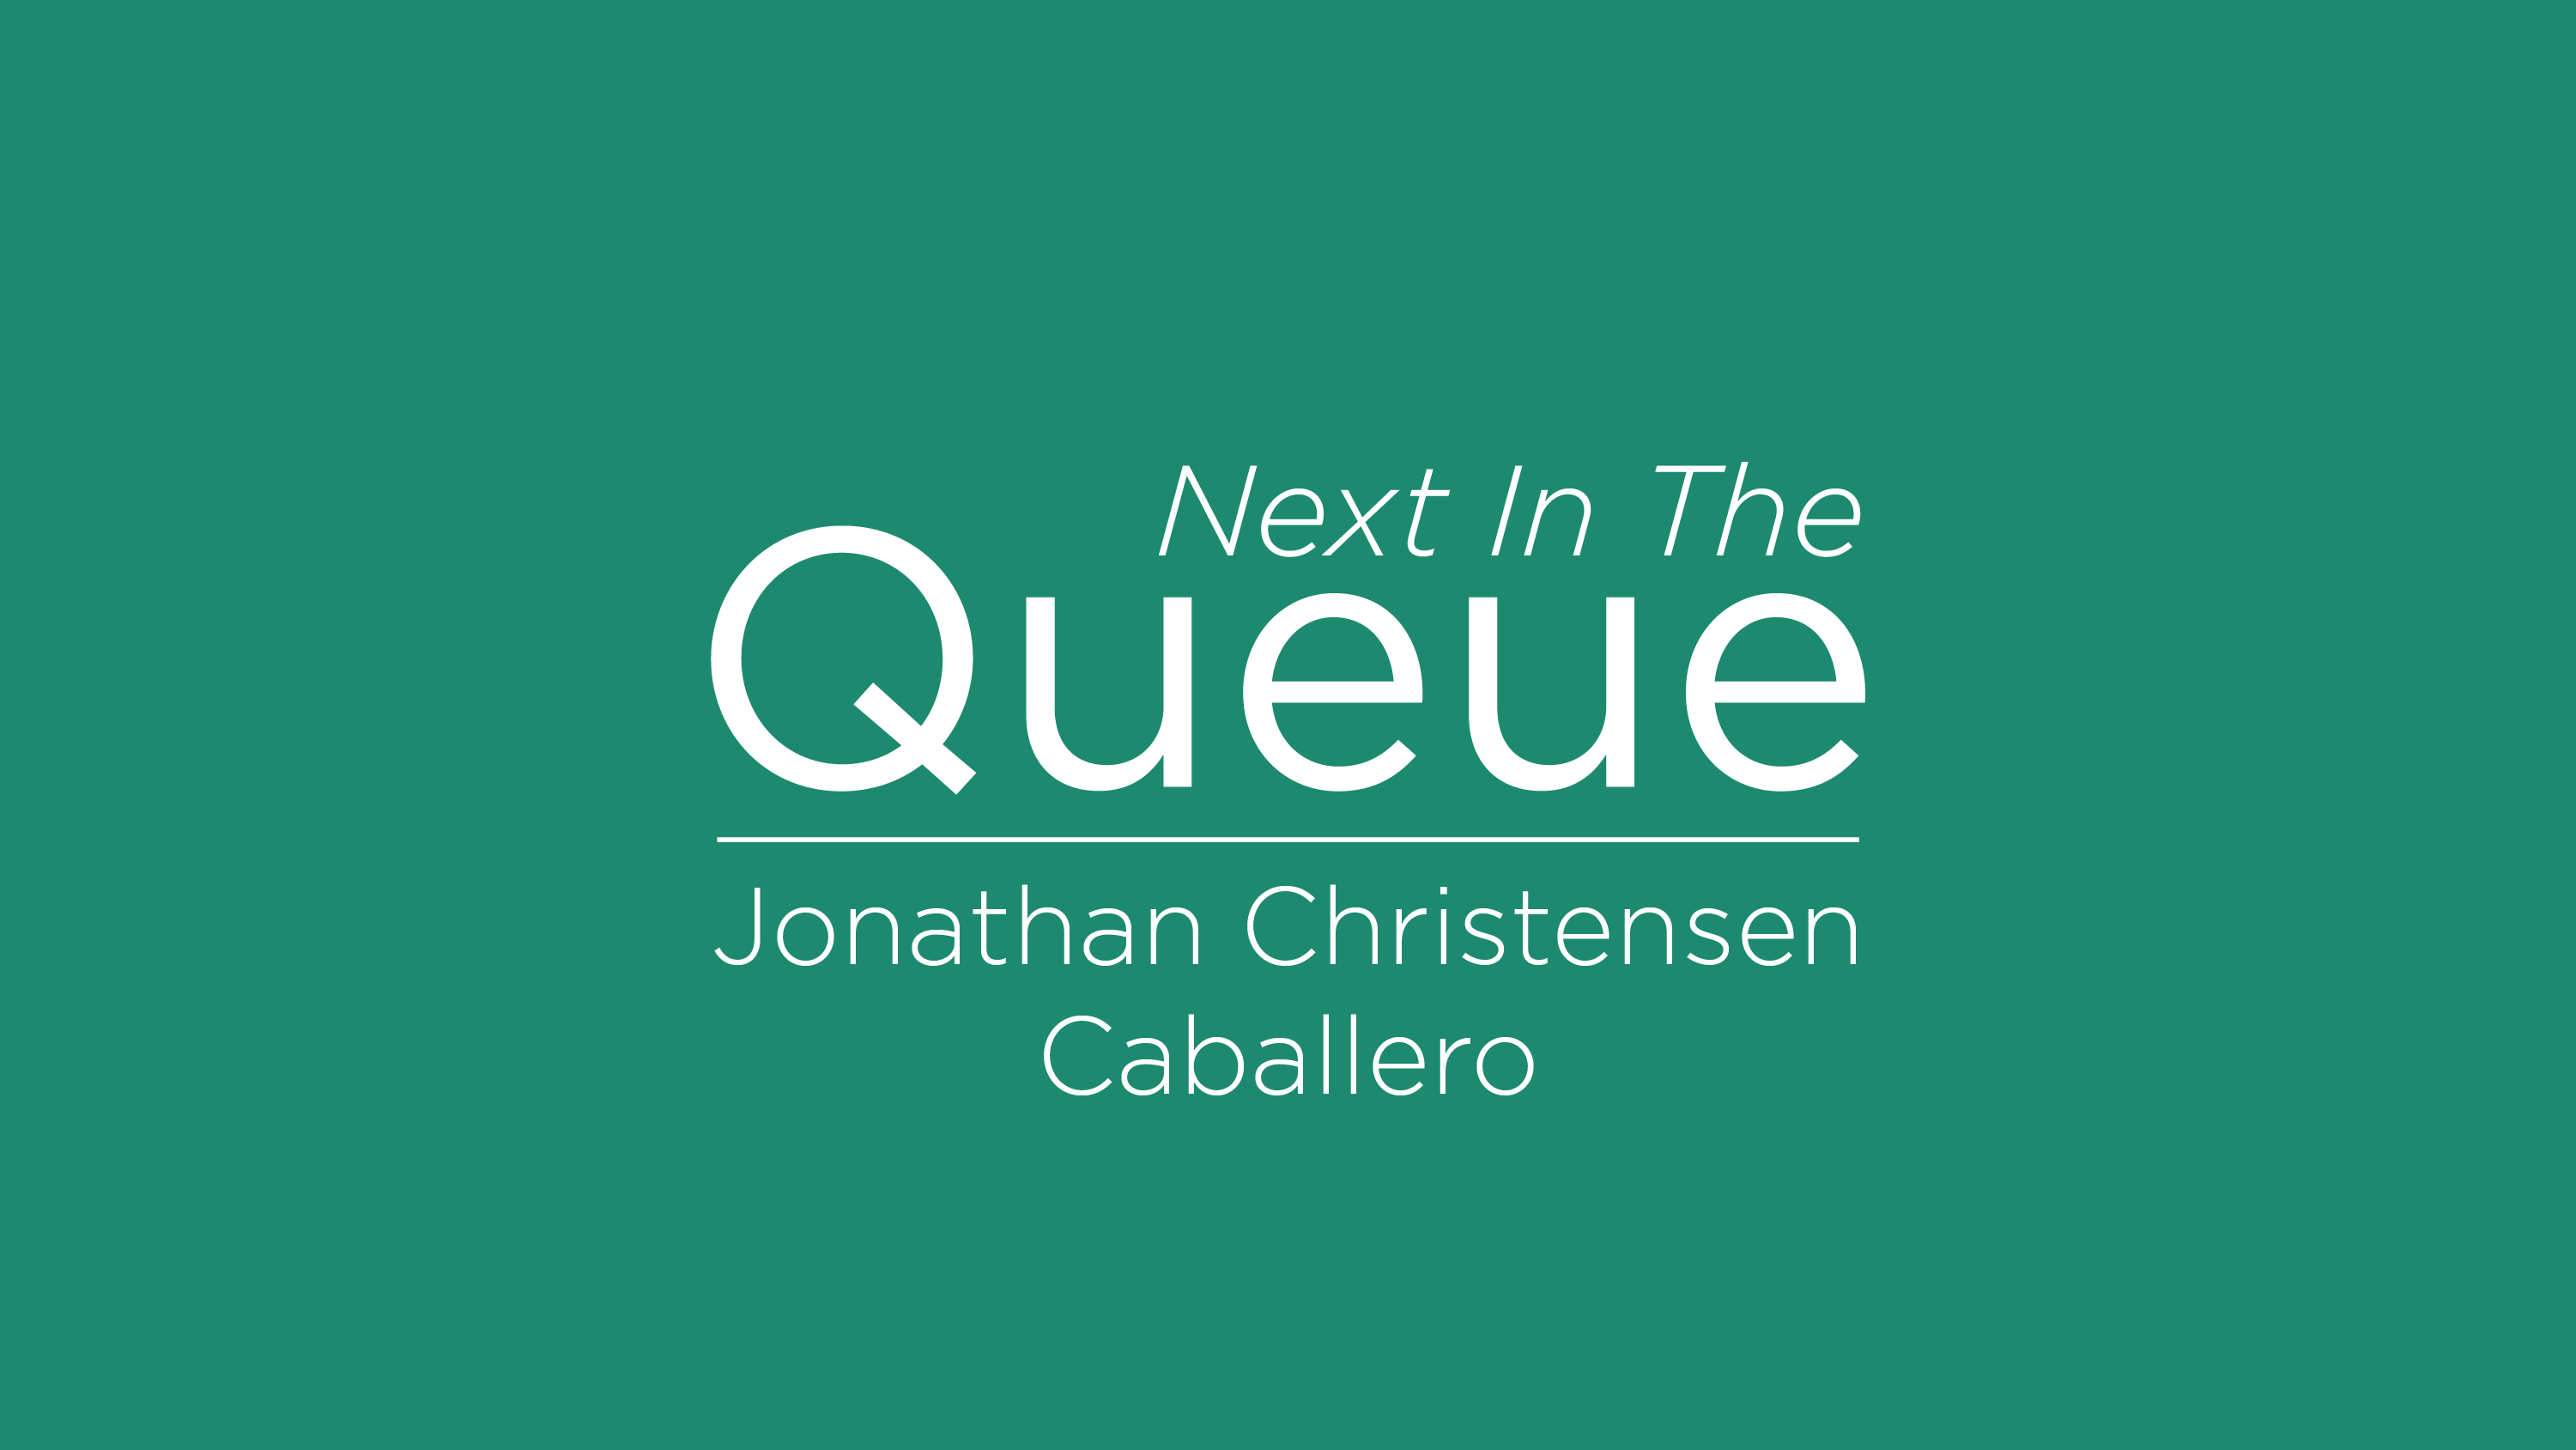 Blog post cover graphic for The Queue featuring Jonathan Christensen Caballero